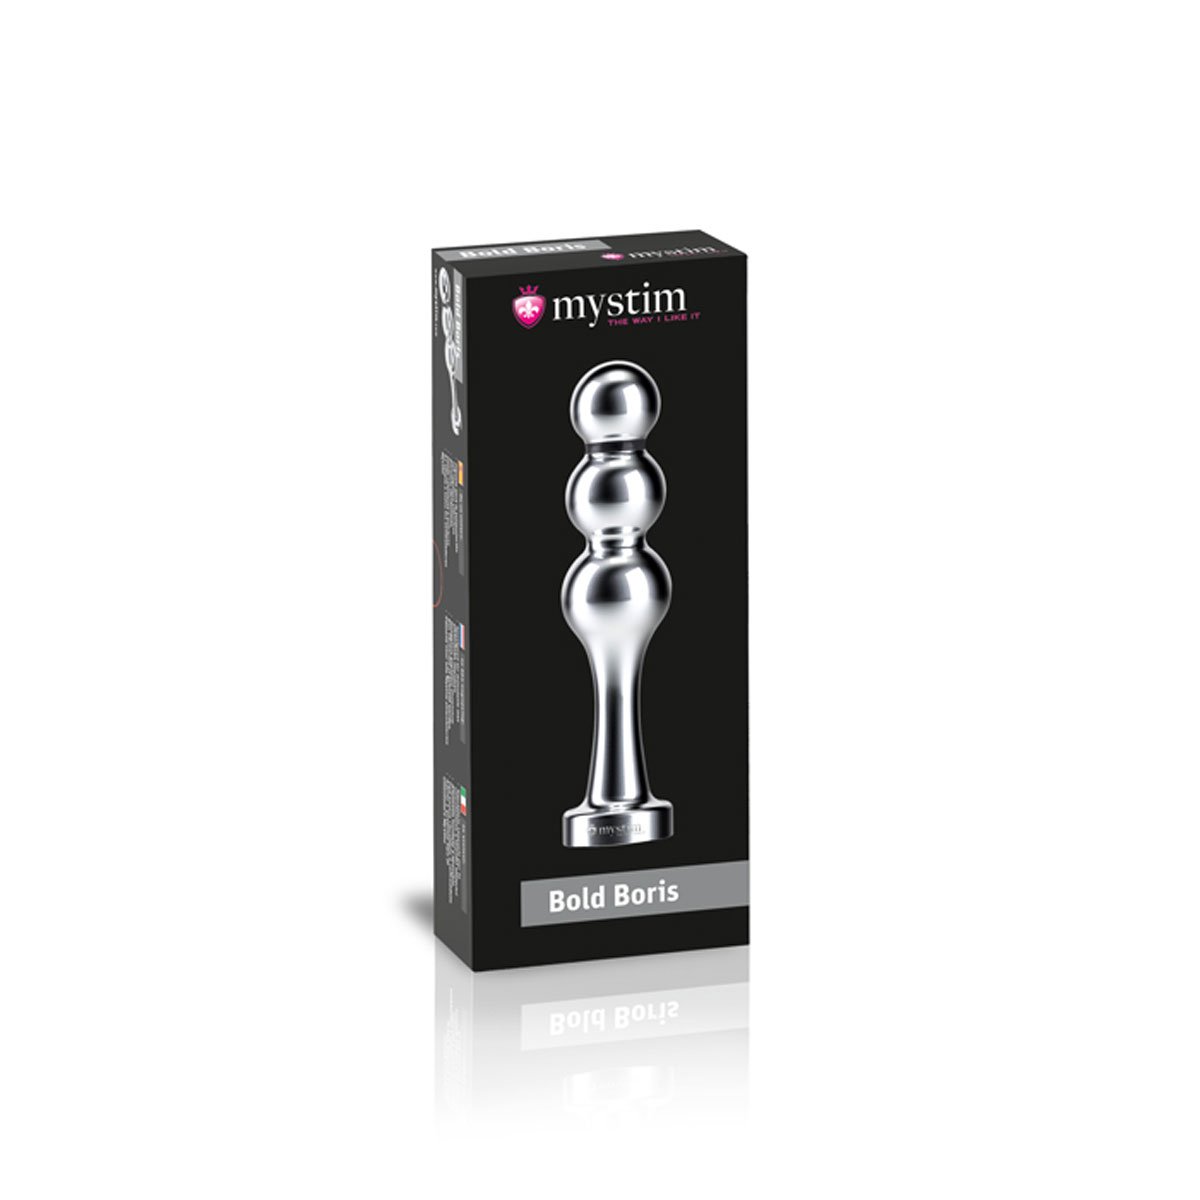 Mystim Bold Brois Ball Dil - Buy At Luxury Toy X - Free 3-Day Shipping